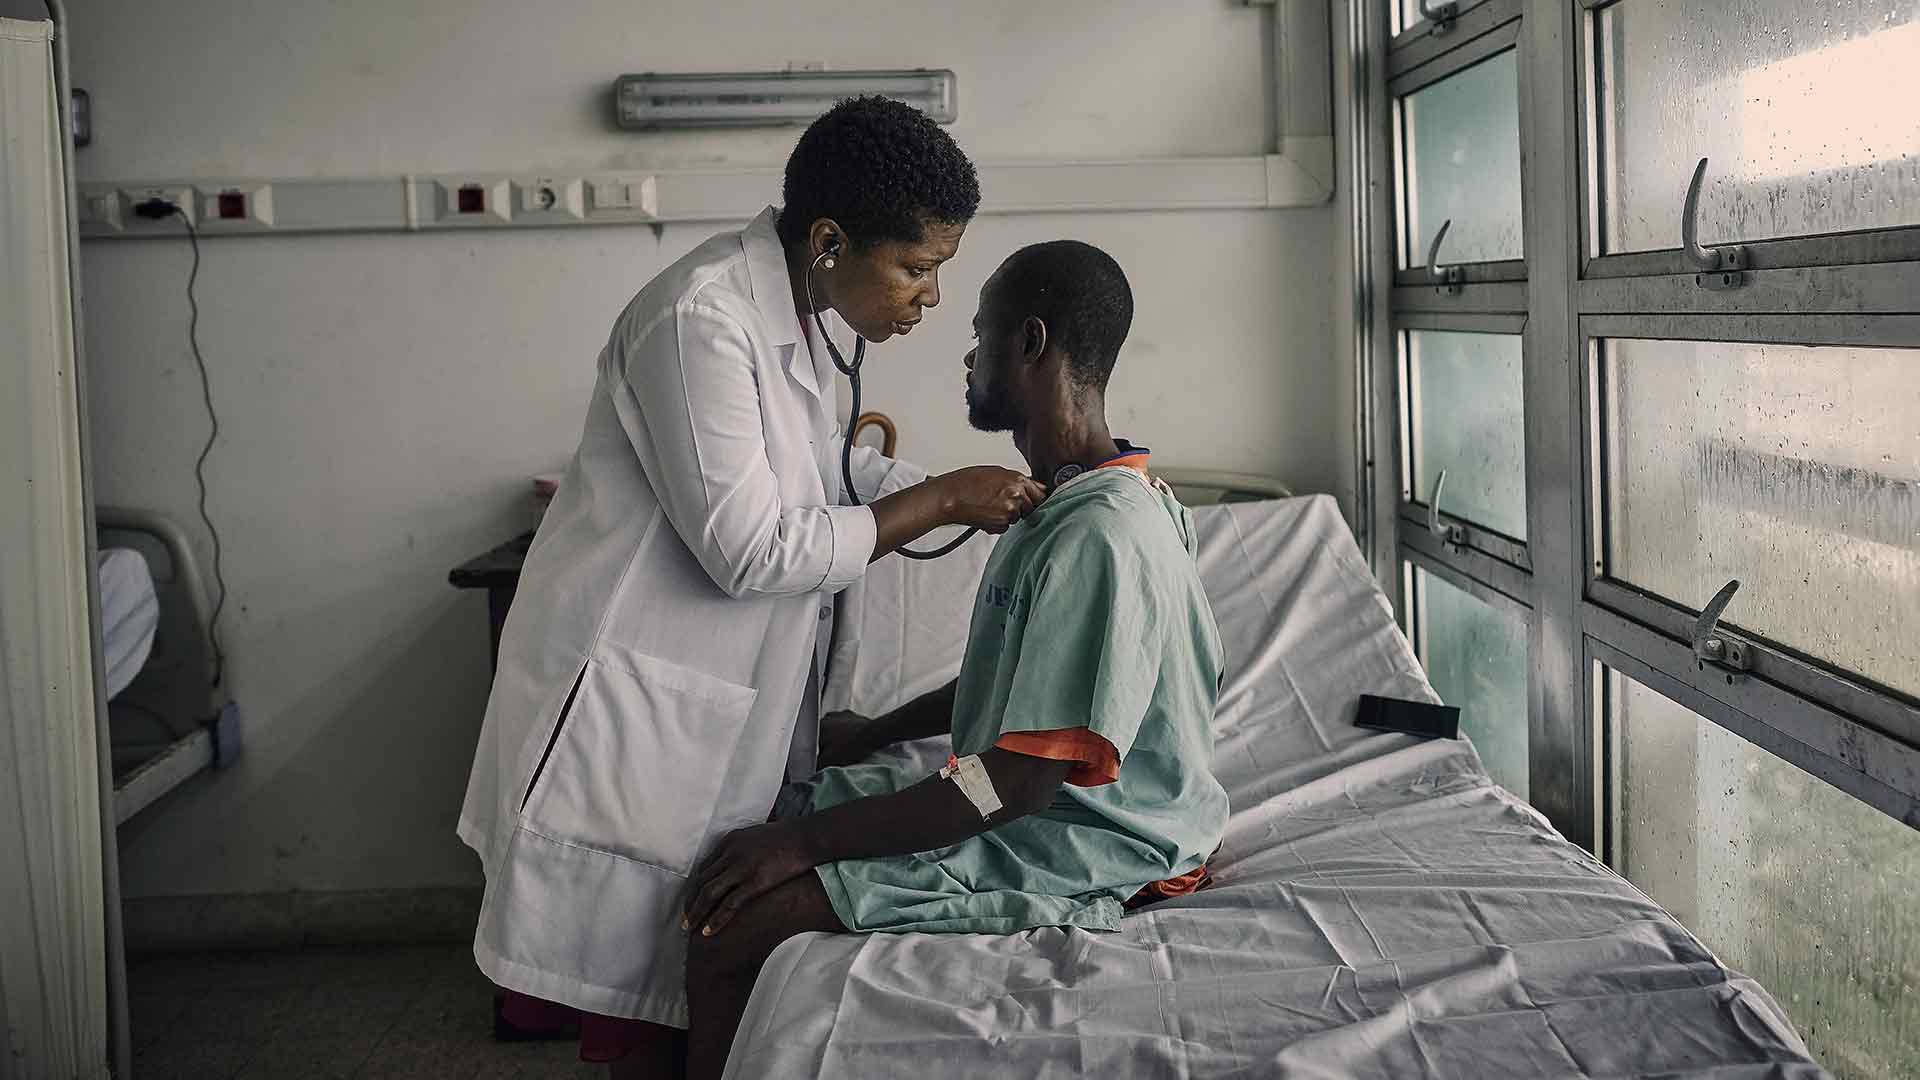 Navy Infectious disease doctor Nehkonti treats a patient in a hospital in Monrovia, Liberia